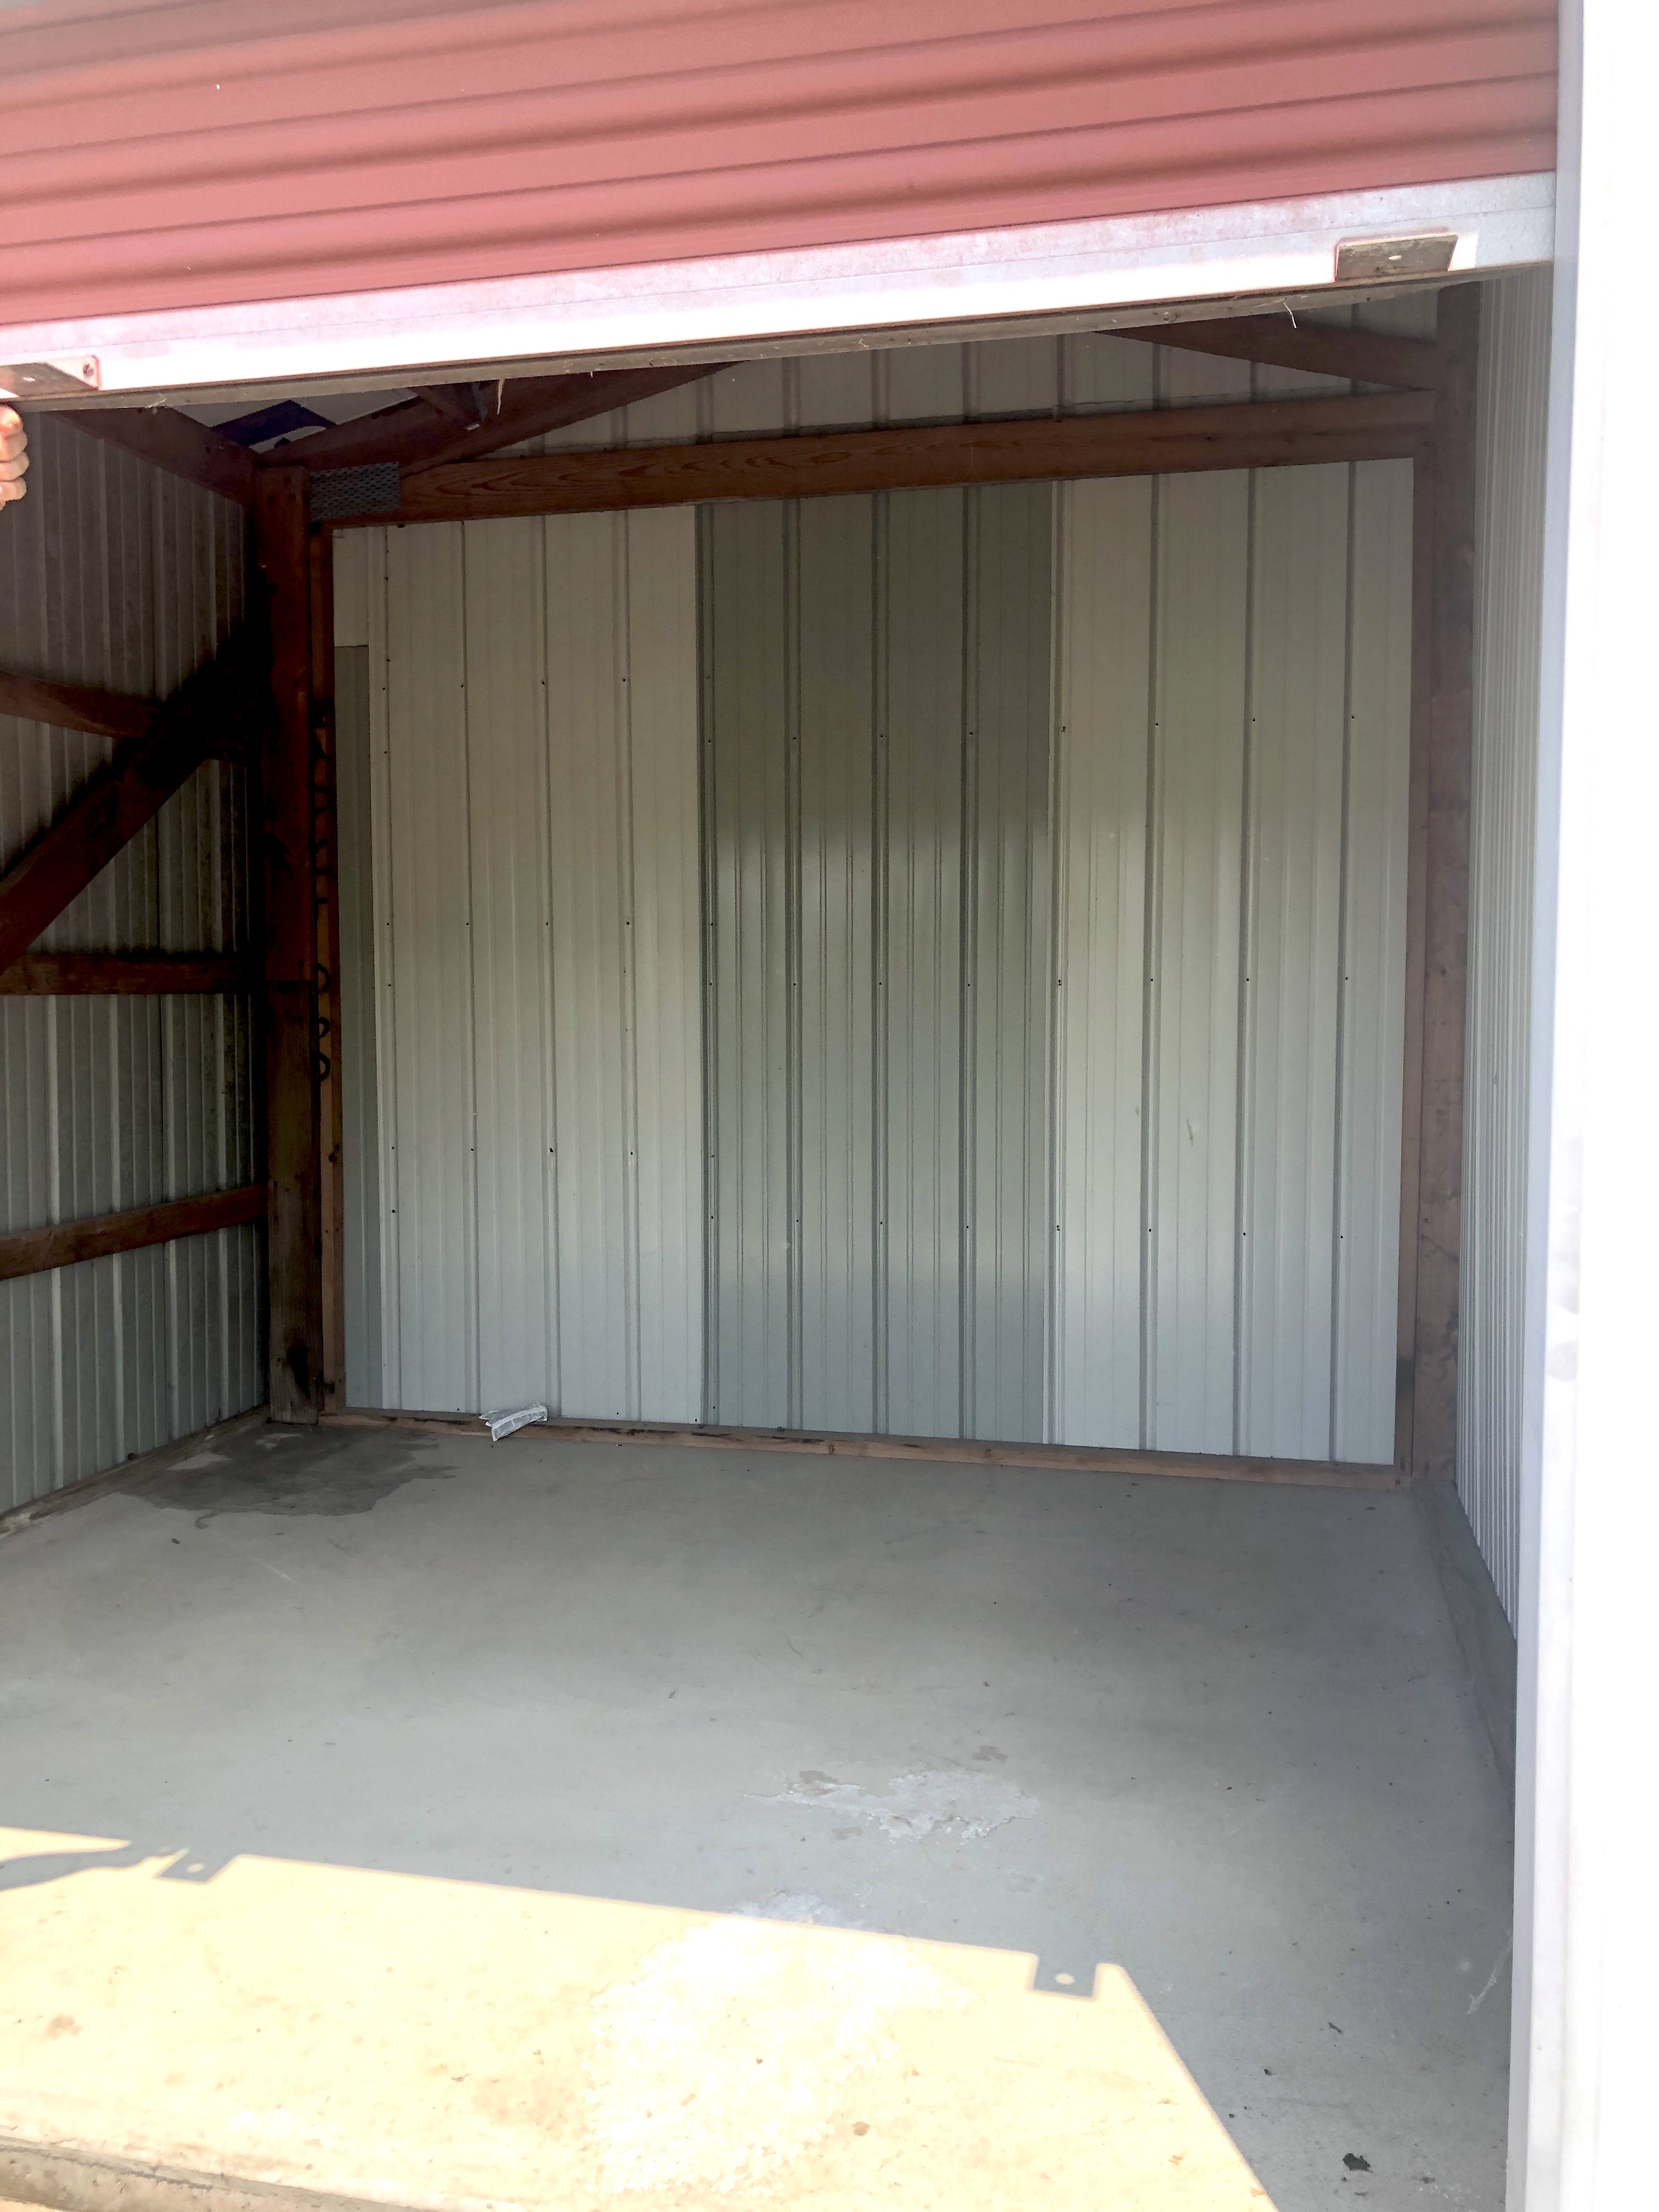 Interior view of a clean and spacious storage unit at Superior Storage, Wheelersburg, OH, demonstrating ample space and a well-maintained environment for safe and secure storage of belongings.